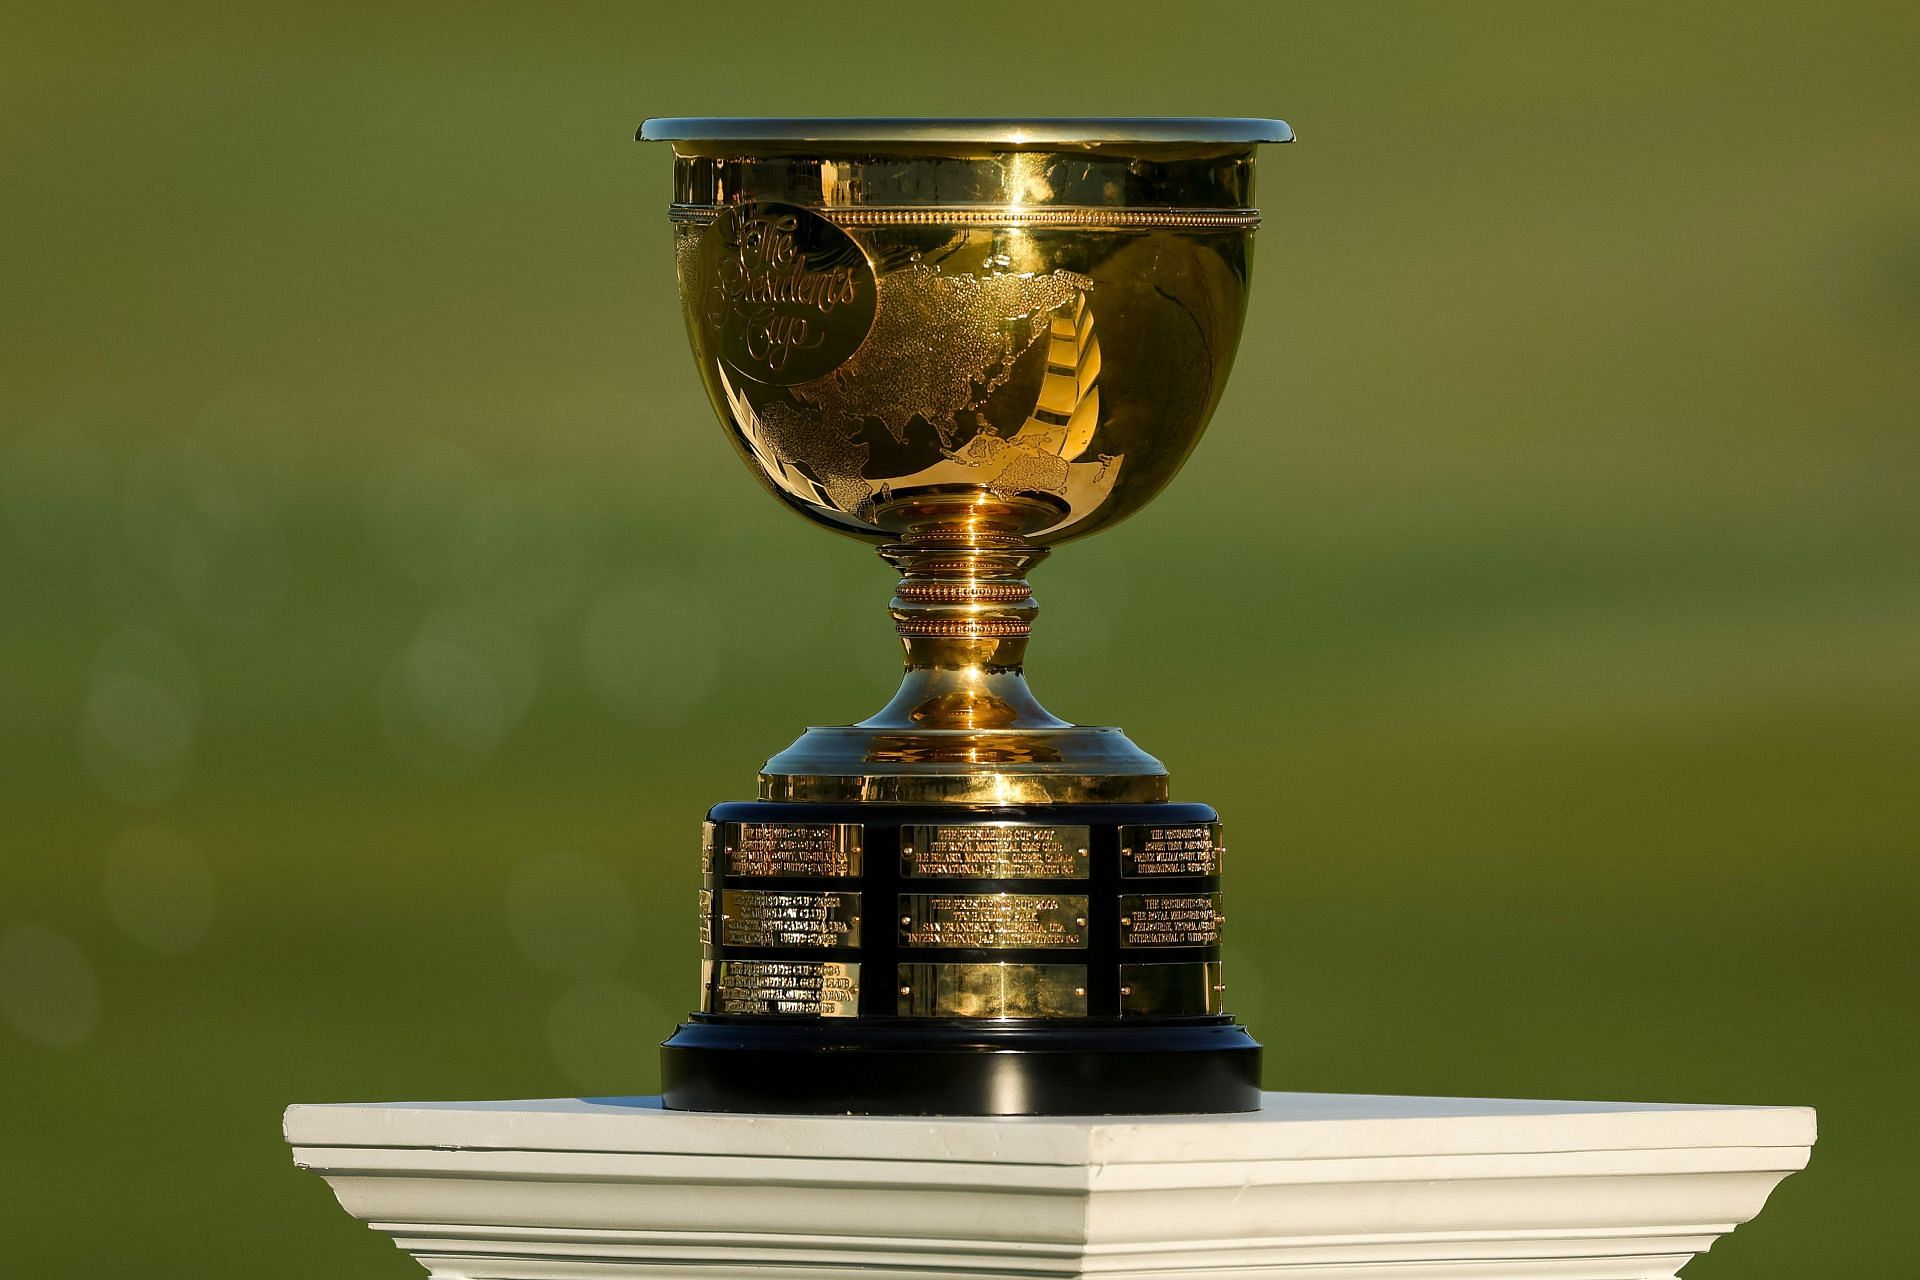 What is the Presidents Cup and why is it called that?